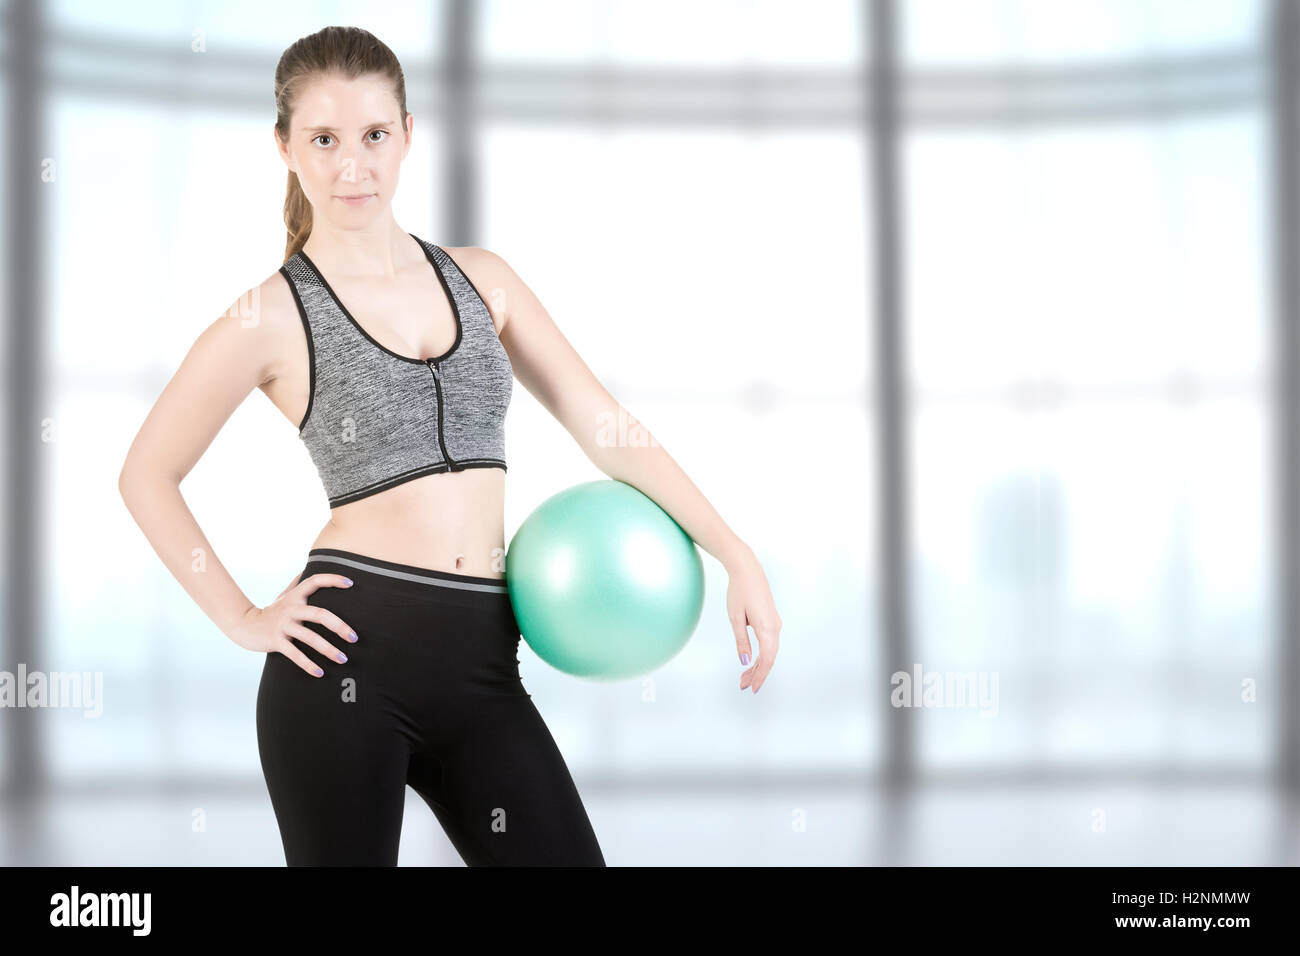 Fit woman standing and holding a pilates ball, in a gym Stock Photo